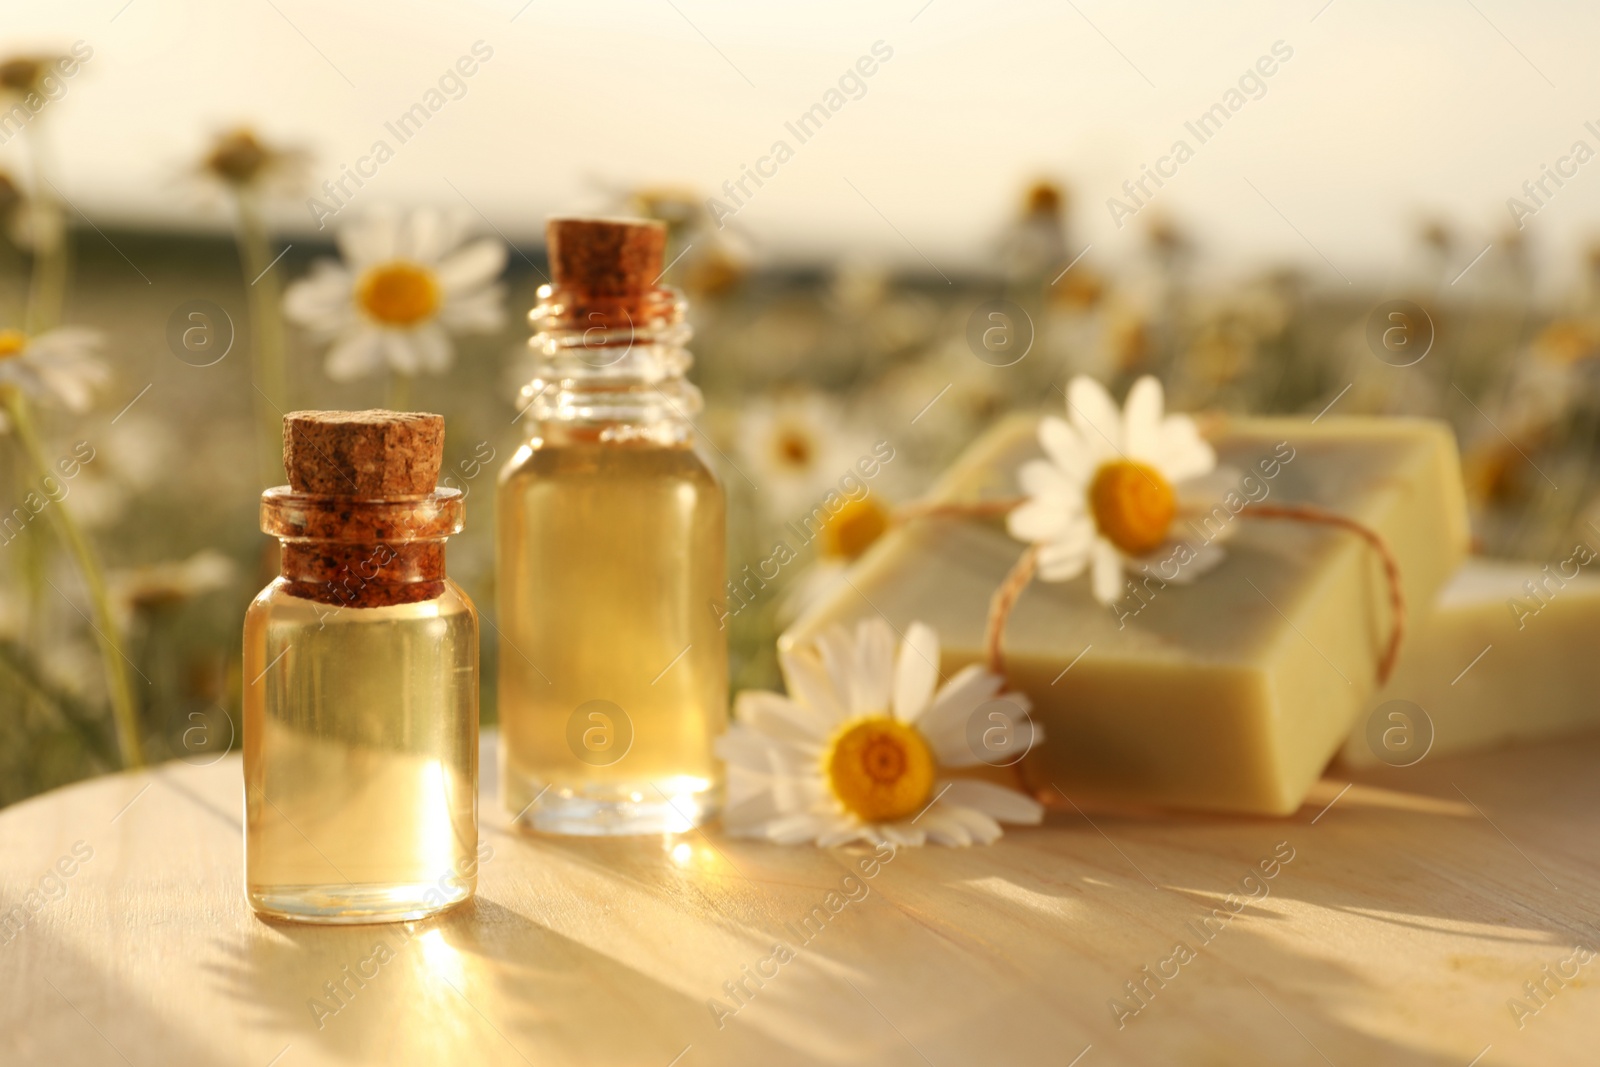 Photo of Bottles of chamomile essential oil and soap bars on wooden table in field